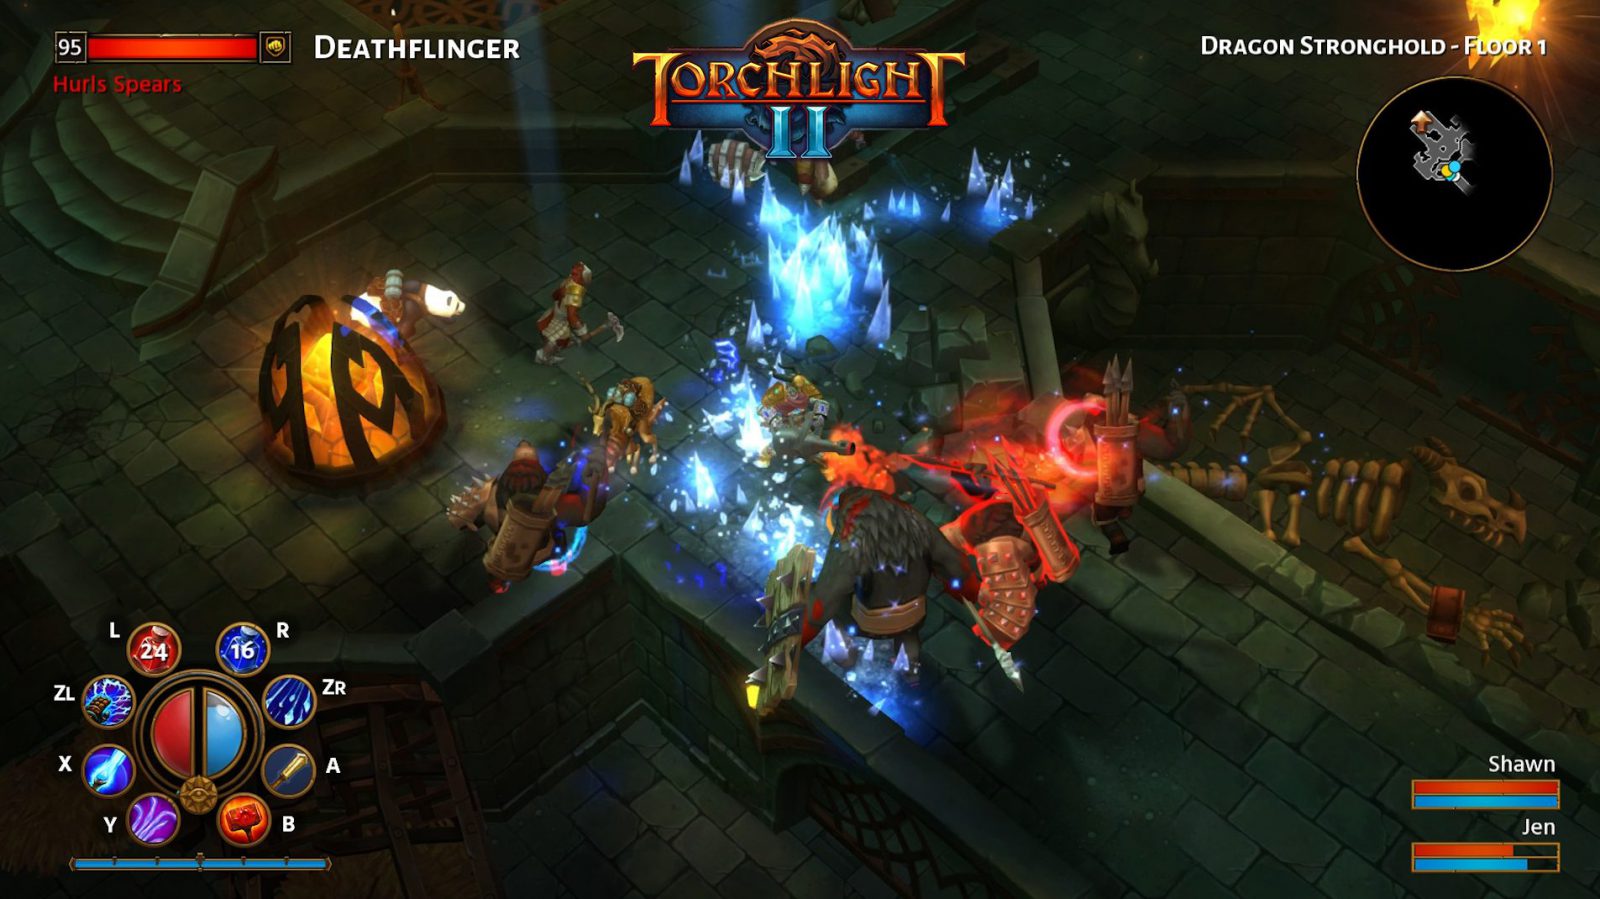 torch continues to burn - Torchlight review GAMING TREND